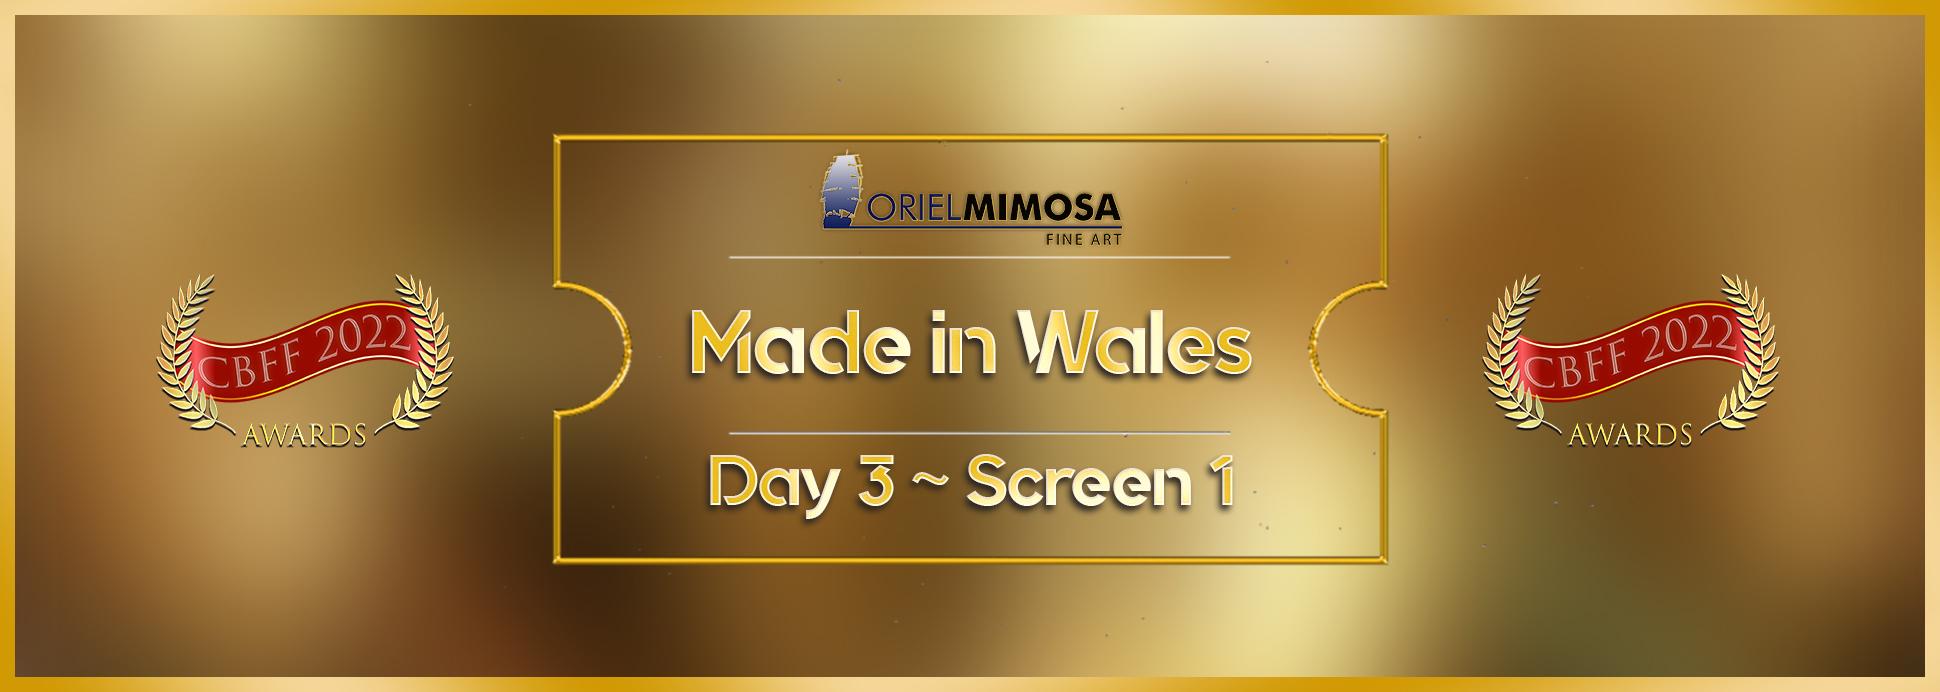 Day 3 Screen 1 Made in Wales